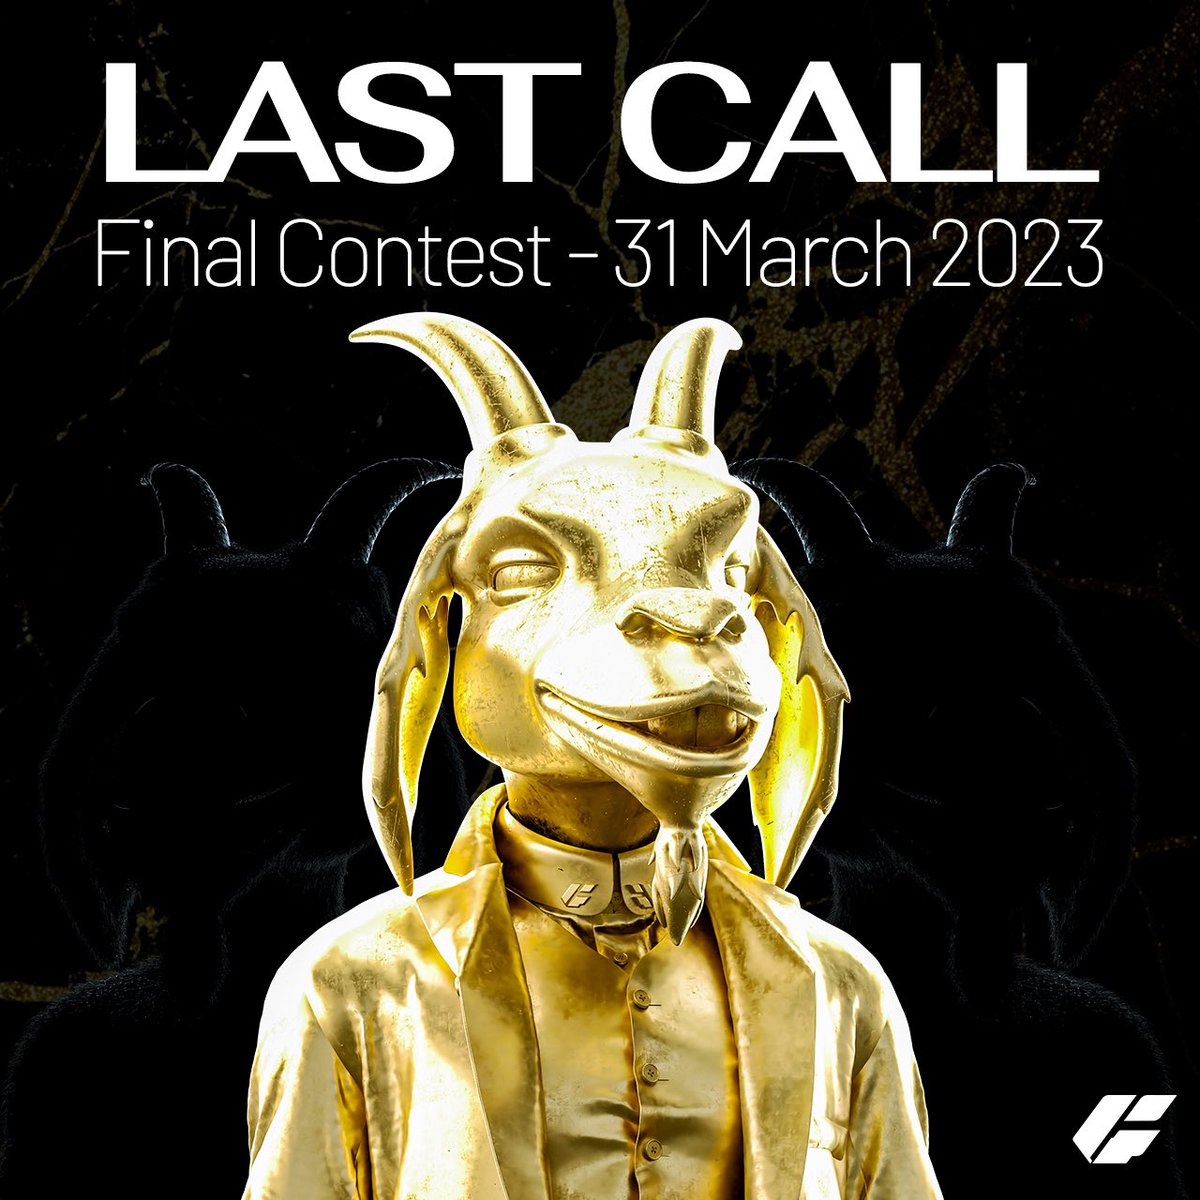 🐐NEW CONTEST with prizes is available: to participate, you will need to sell at least 5 Goats in affiliation by 31 March, whoever sells the most Goats in affiliation will be entitled to the following prizes: 

🏆 1st Place: 5 bales of hay + 1 Goat
🏆 2nd Place: 2 Goats

#nft